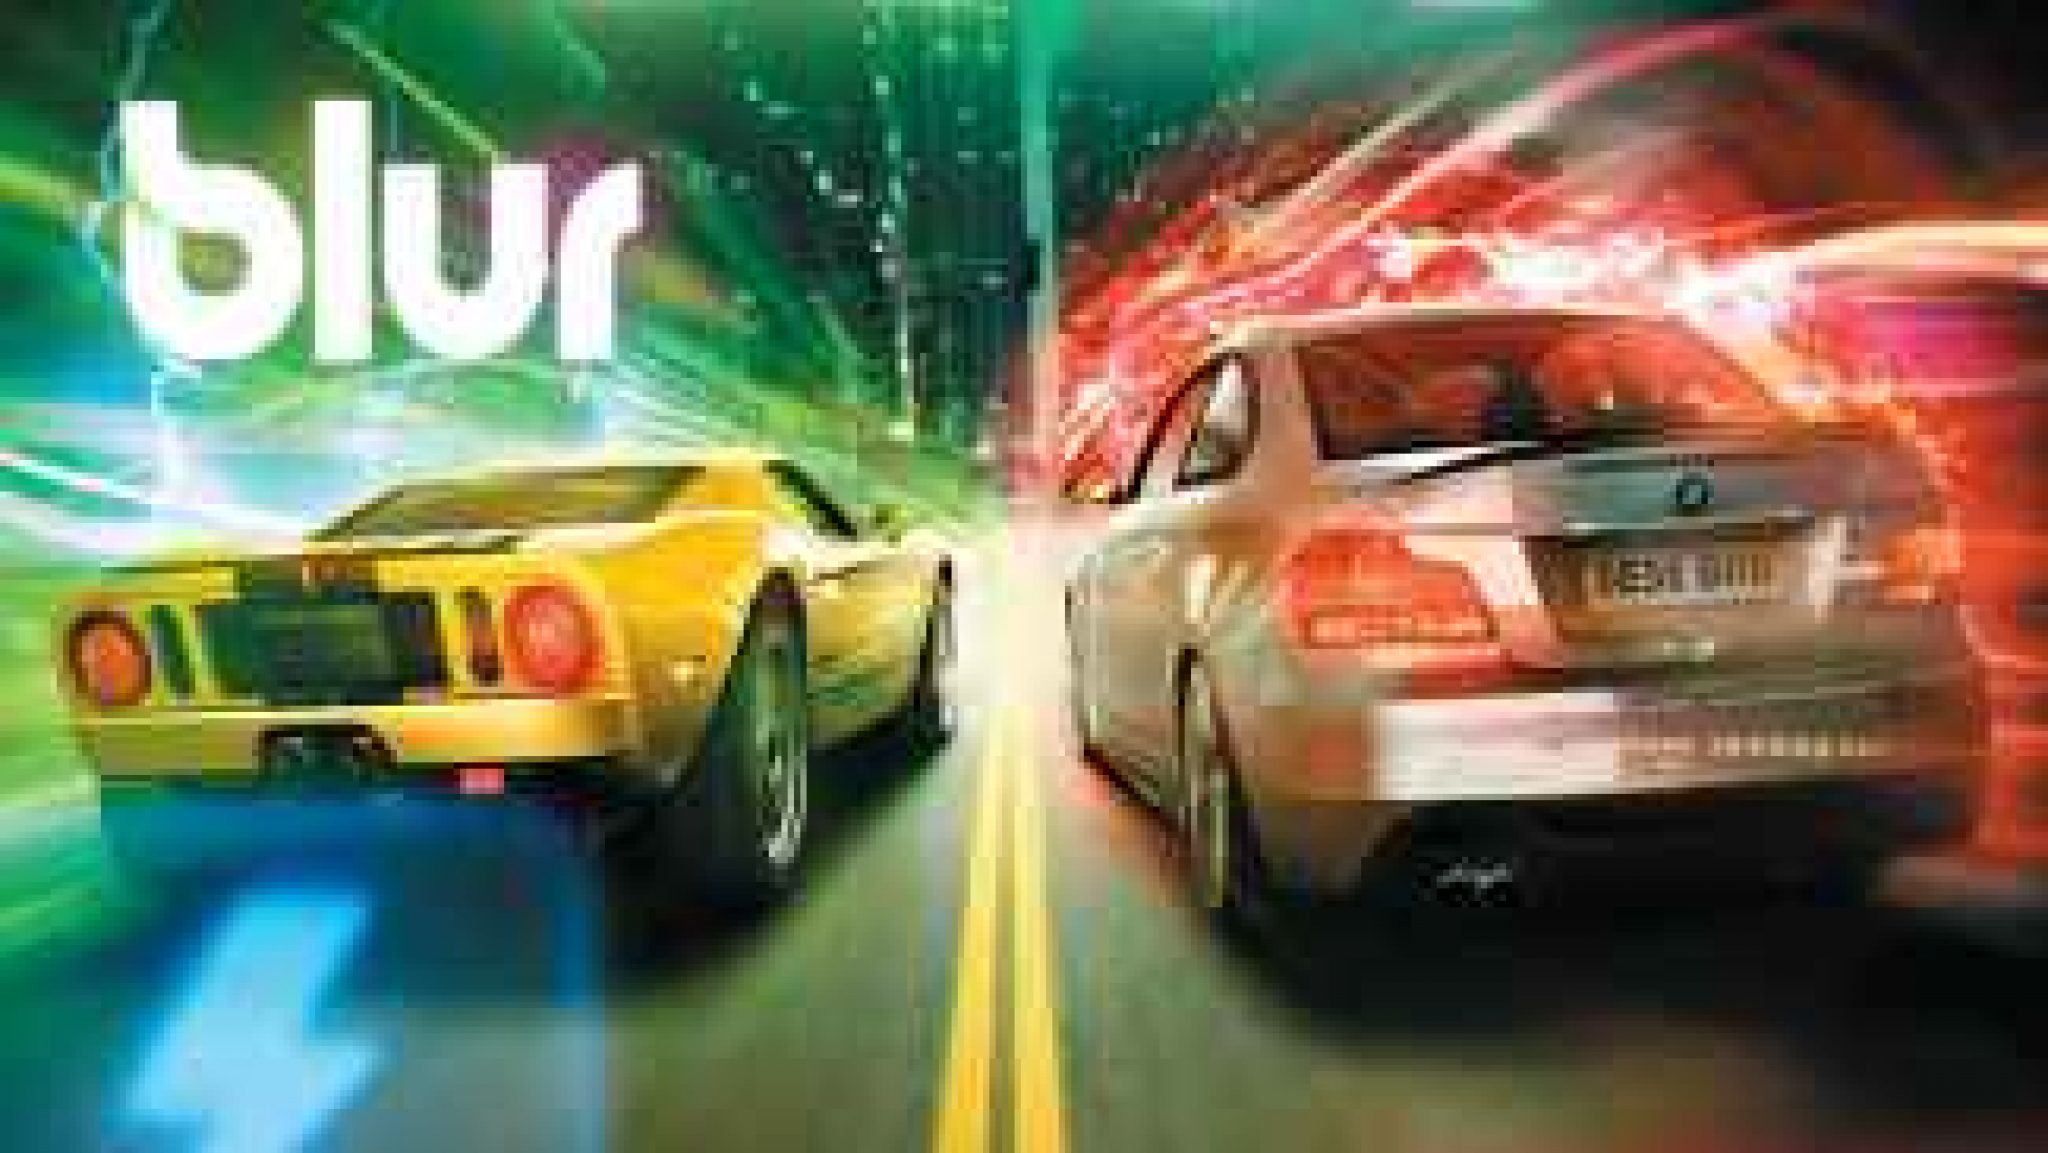 blur pc game highly compressed 10mb